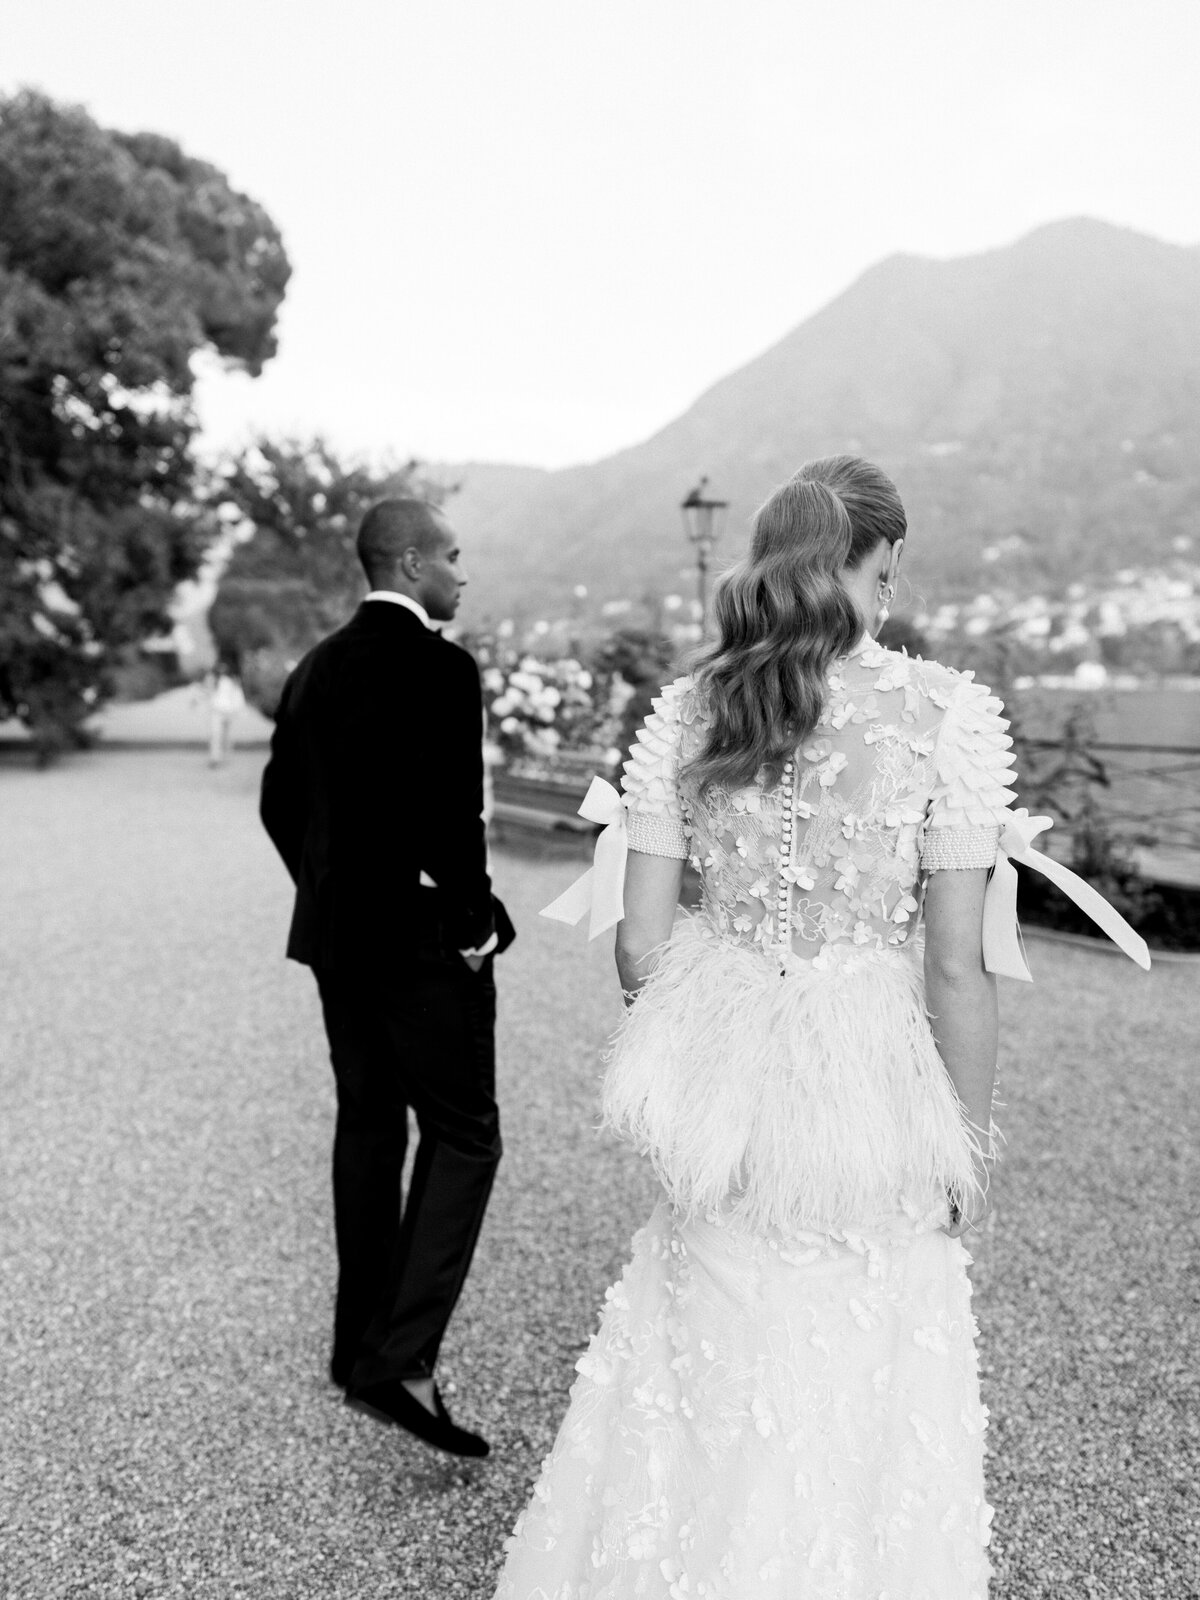 Liz Andolina Photography Destination Wedding Photographer in Italy, New York, Across the East Coast Editorial, heritage-quality images for stylish couples Villa Pizzo Editorial-Liz Andolina Photography-517